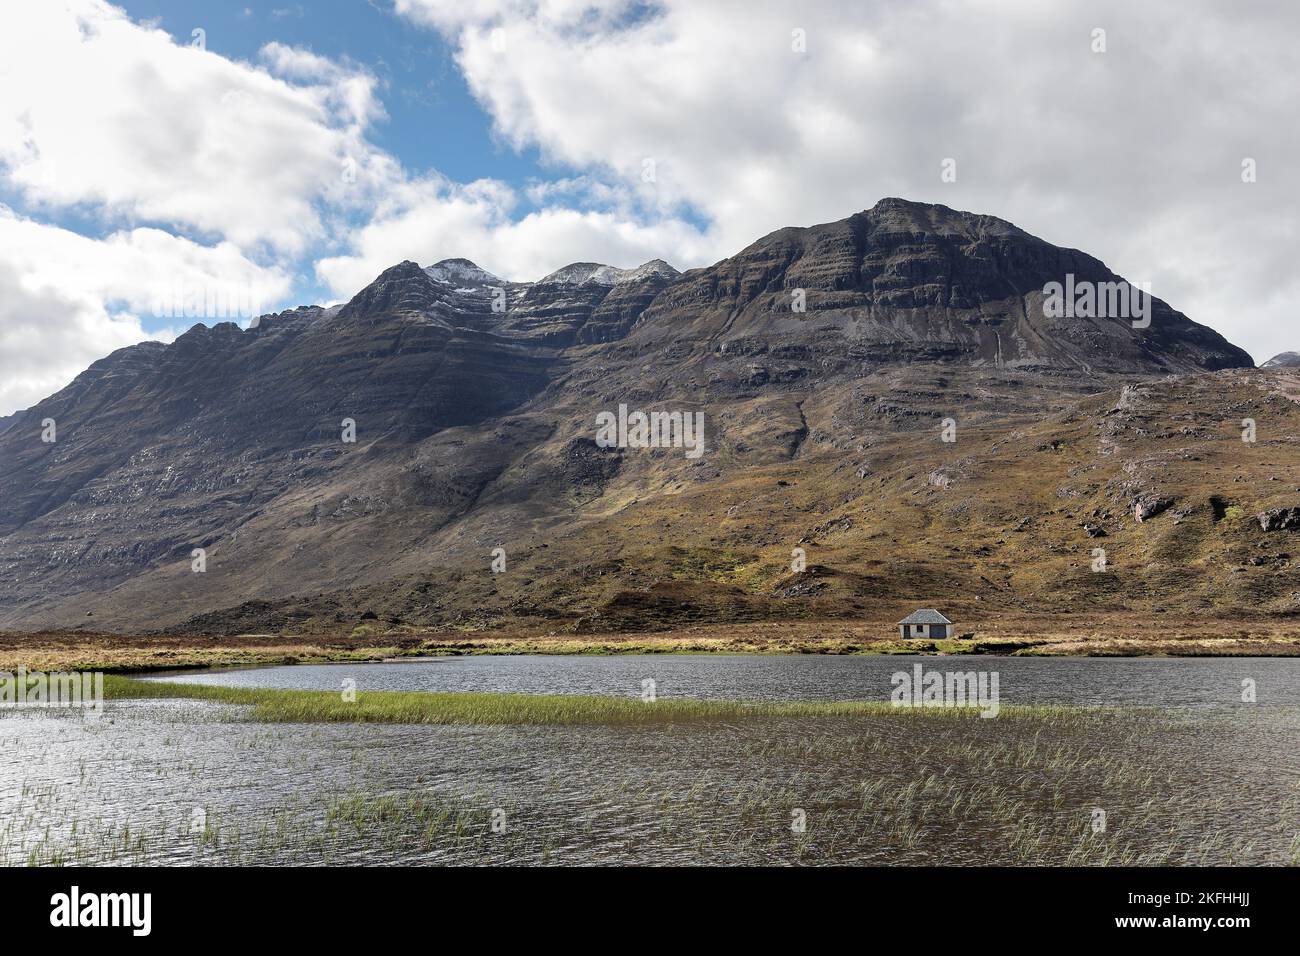 The Mountain of Liathach Enveloped in Cloud as Snow Shower Sweeps Across its Flanks, Viewed across Lochan an Lasgair, Torridon, Scotland, UK Stock Photo